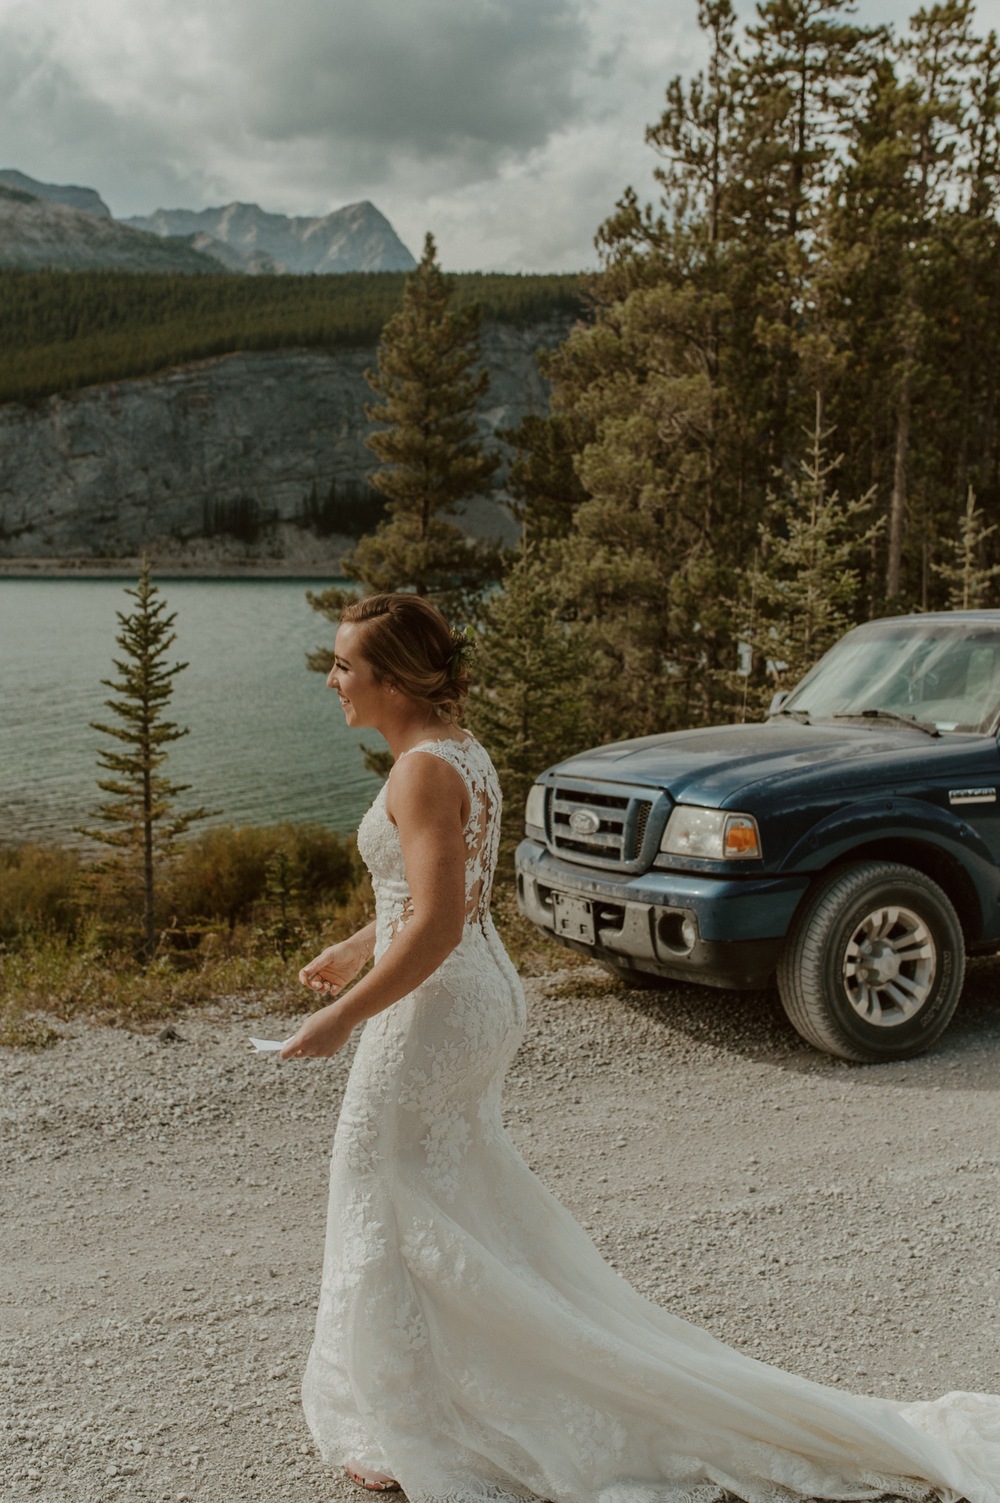 Driving down a dirt mountain road to the location of their elopement ceremony in Kananaskis Alberta